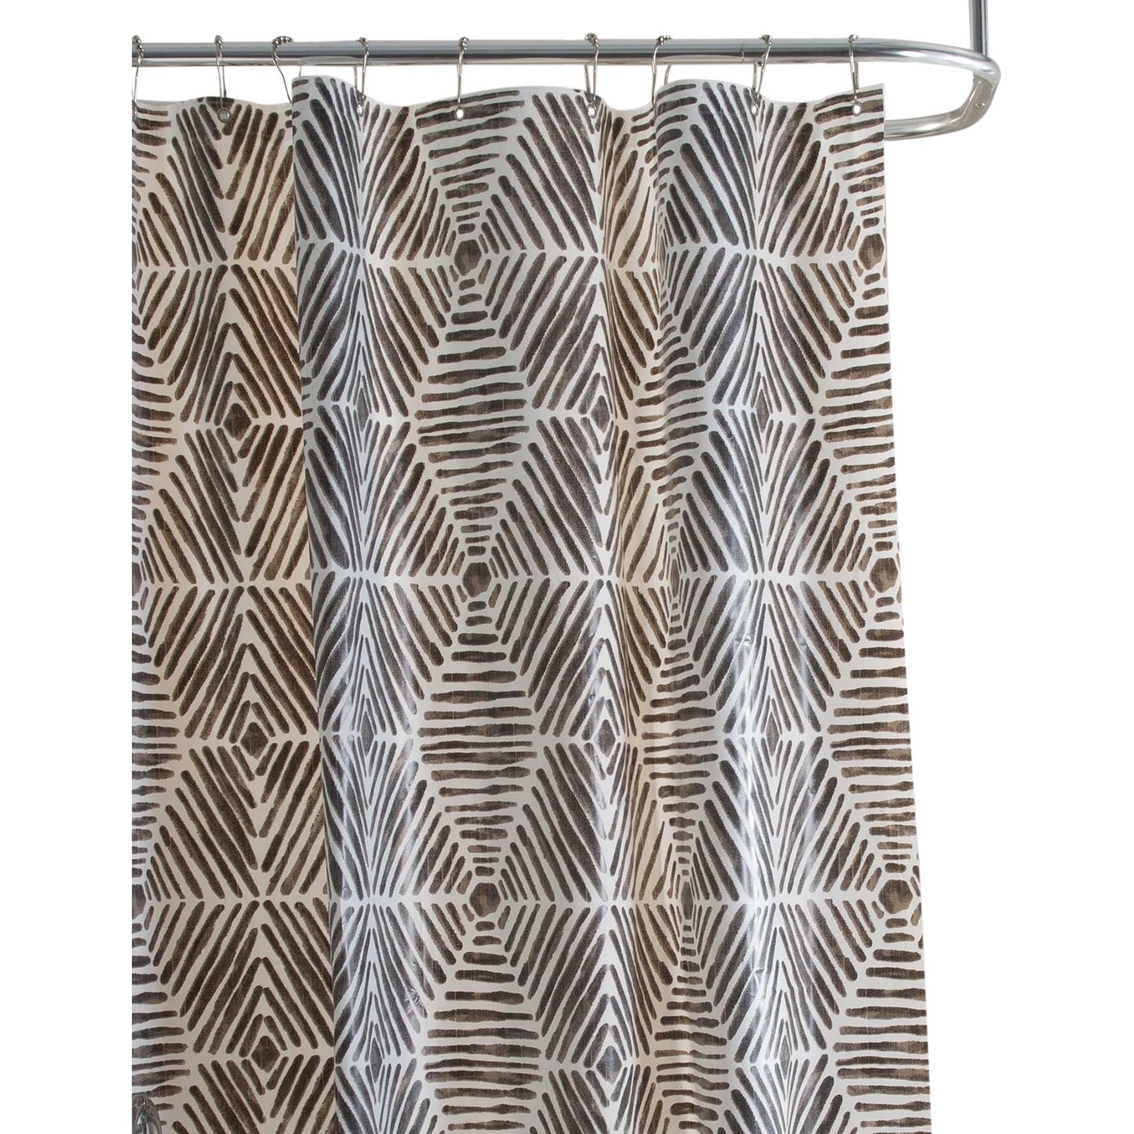 Bath Bliss Abstract Design PEVA Shower Curtain - Image 2 of 3